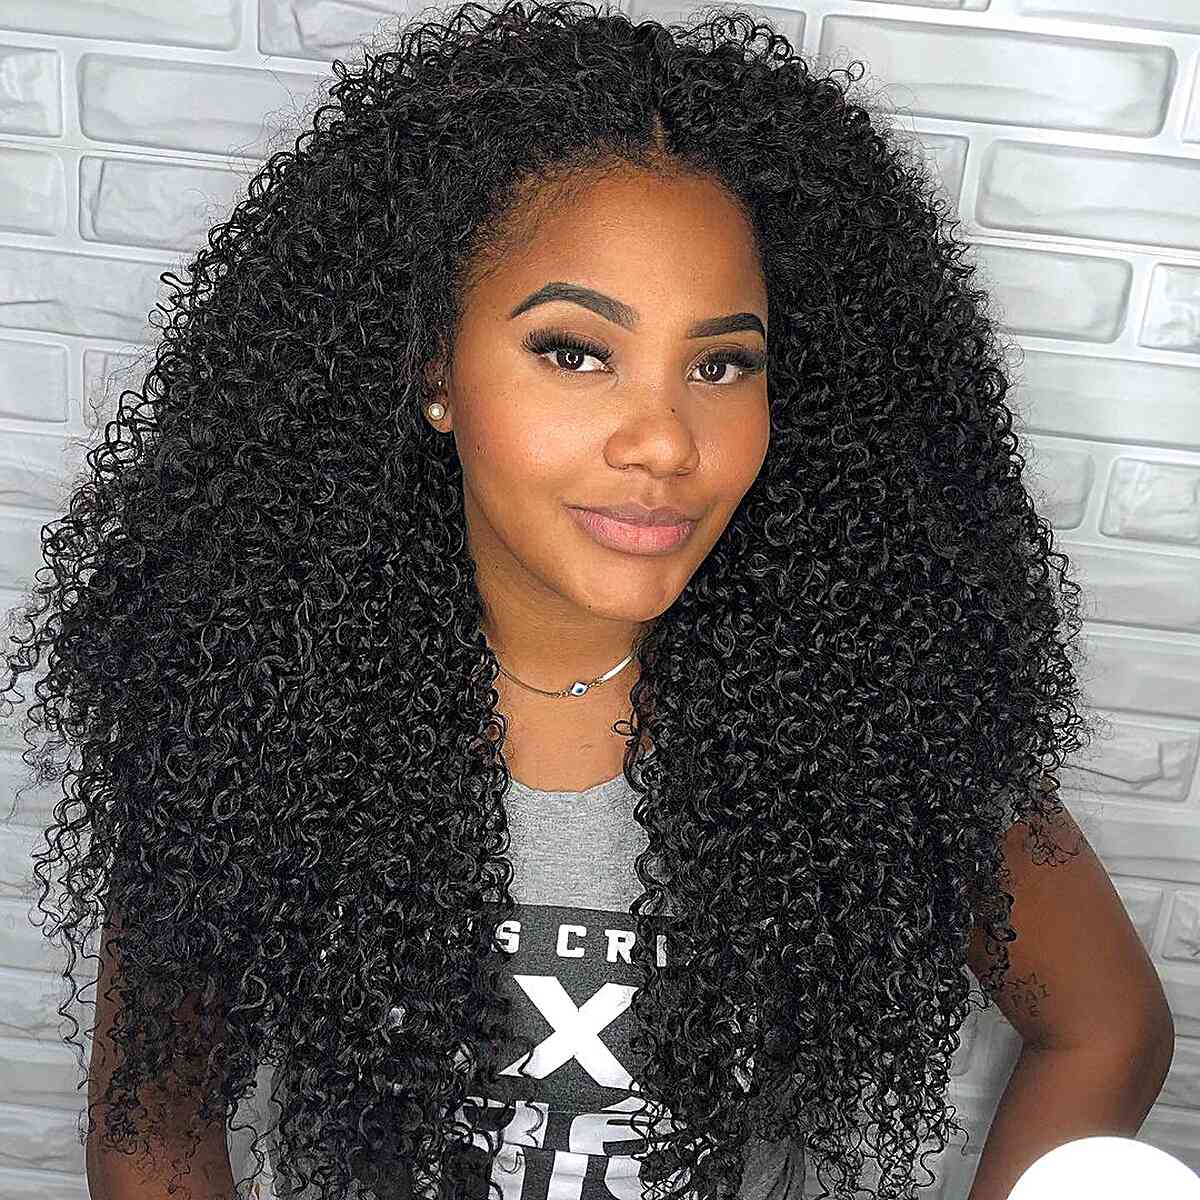 Three Common Hairstyles of African American Wigs To get You Noticed  Contemporary, edgy and classic… | by 9286m50wkvs5k32cijx6xt | Medium